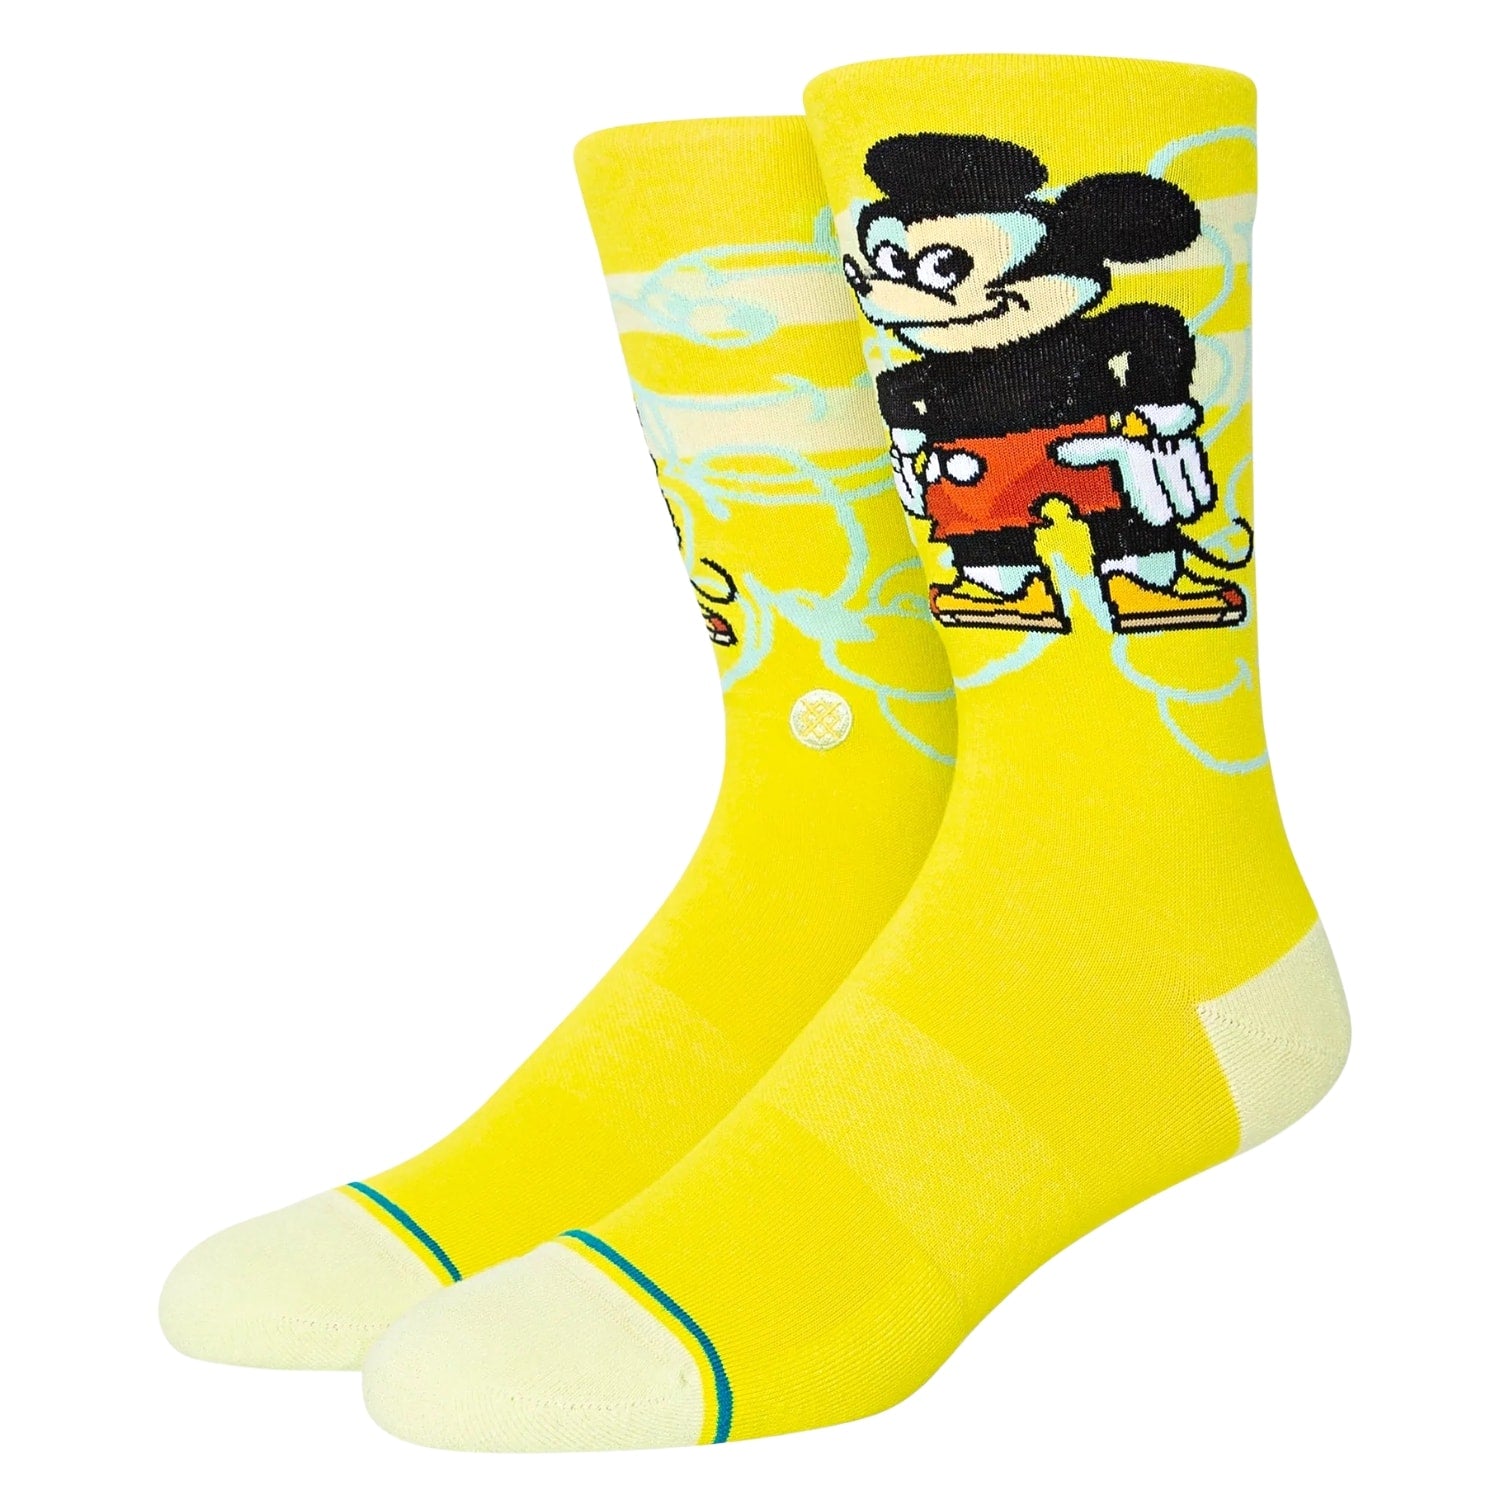 Stance Mickey Dillon Froelich Socks - Lime - Unisex Crew Length Socks by Stance L (UK8-12.5)